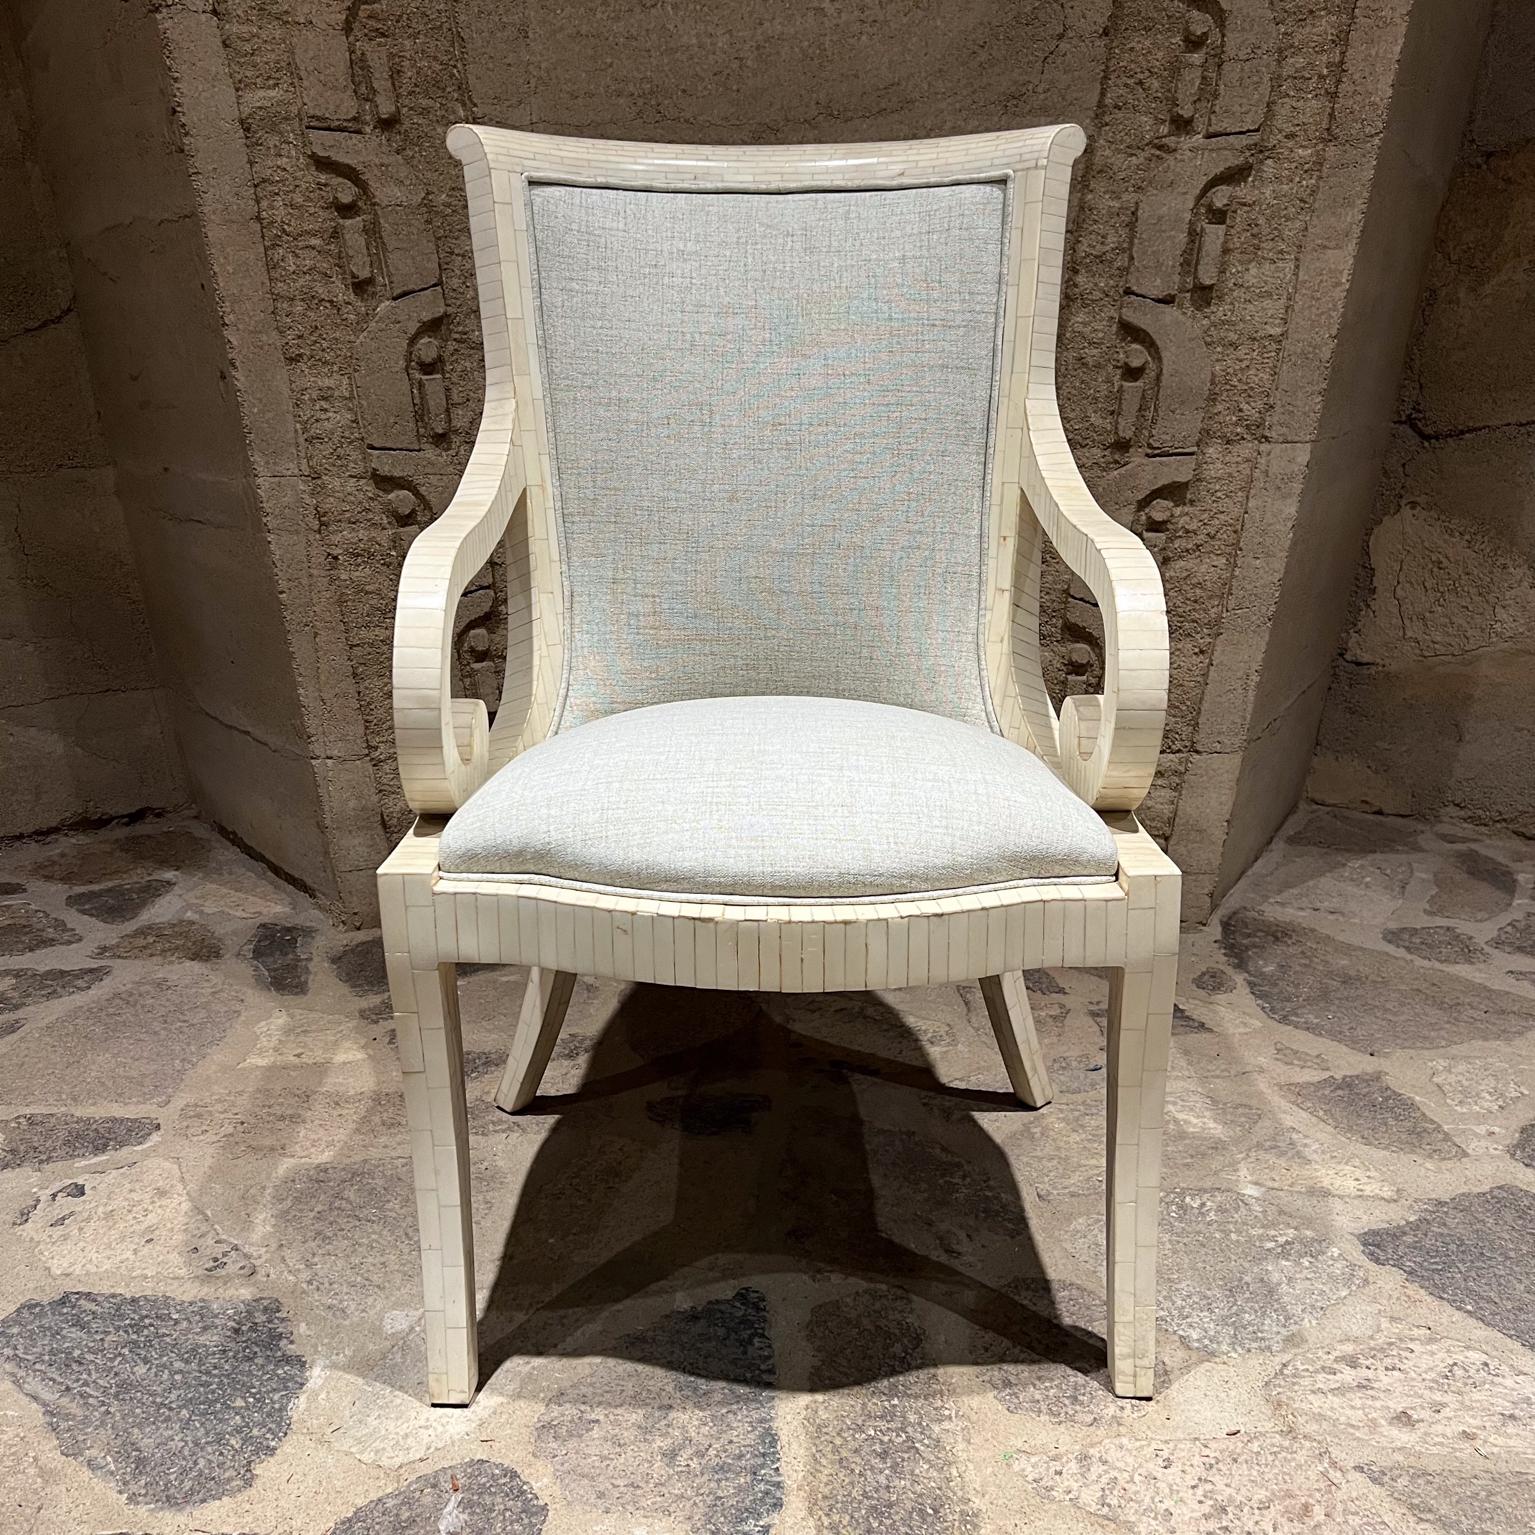 1970s Enrique Garcel (in the style of Karl Springer + Maitland Smith)
Armchair in tessellated bone
Fabulous sculptural profile
Original vintage preowned condition with new upholstery.
Some tiles have been restored.
39 h x 22.5 w x 28.25 d
Arm rest